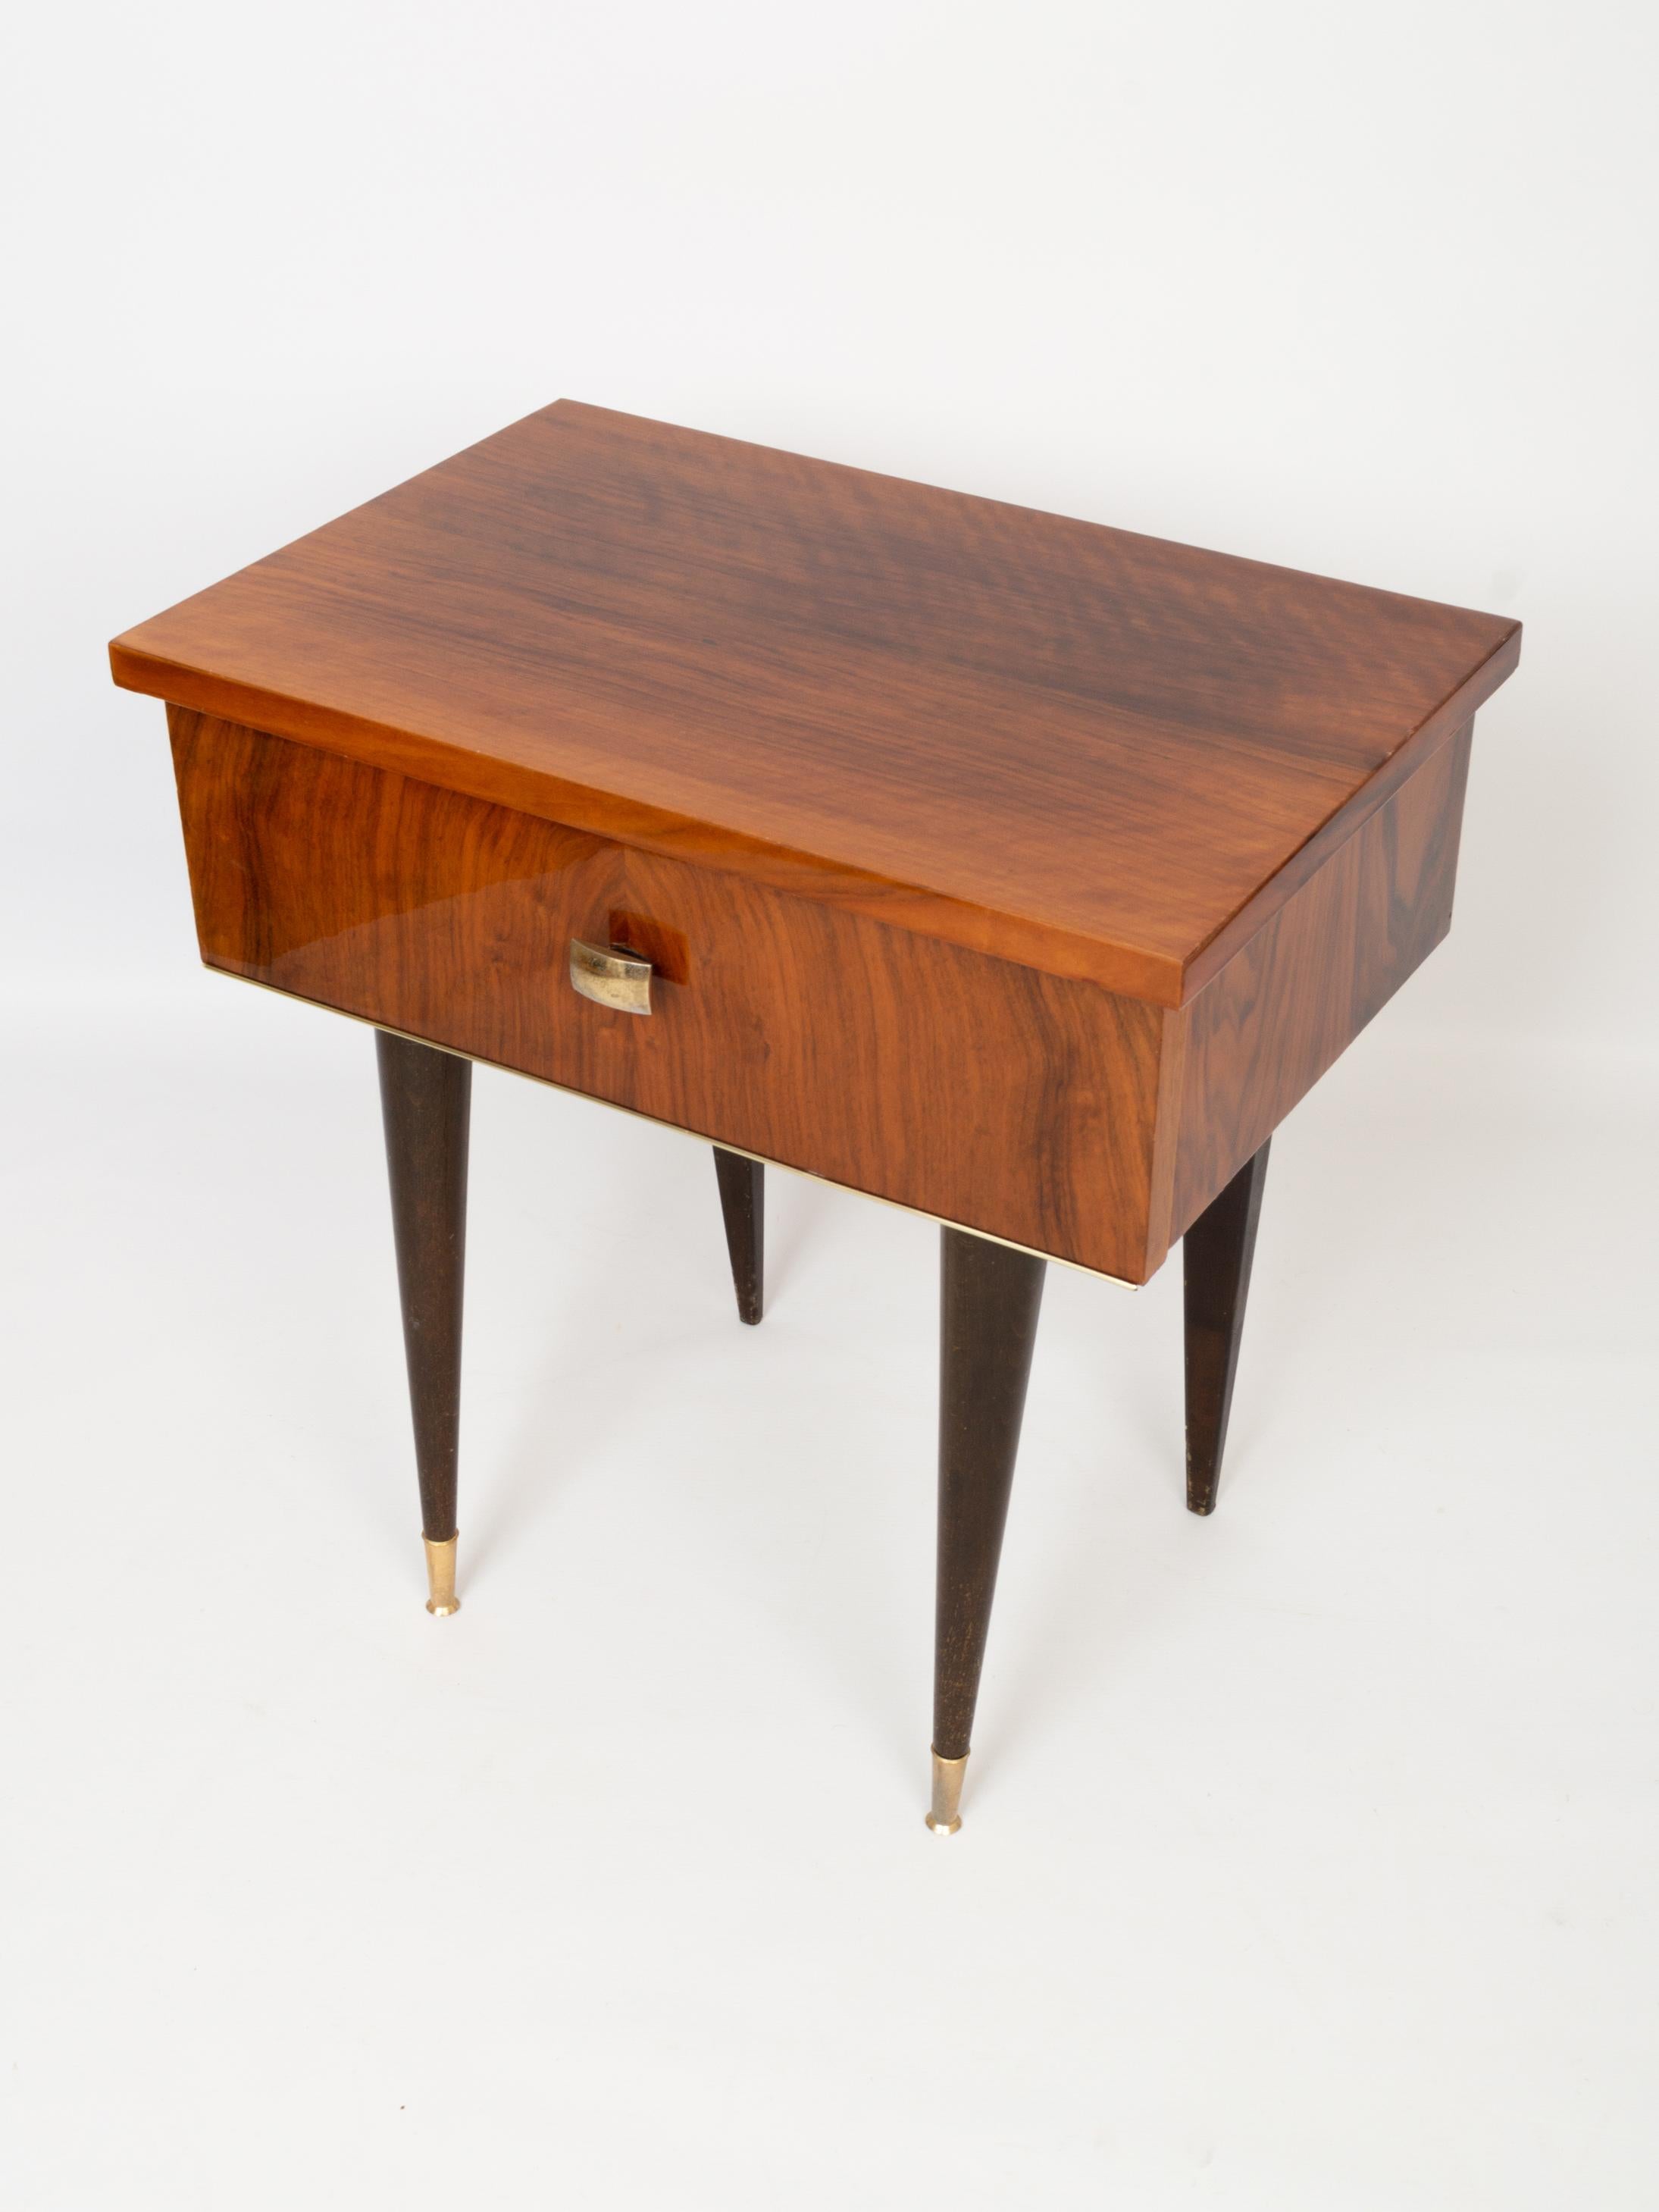 20th Century Art Deco Walnut Side Table Night Stand, France, C.1940 For Sale